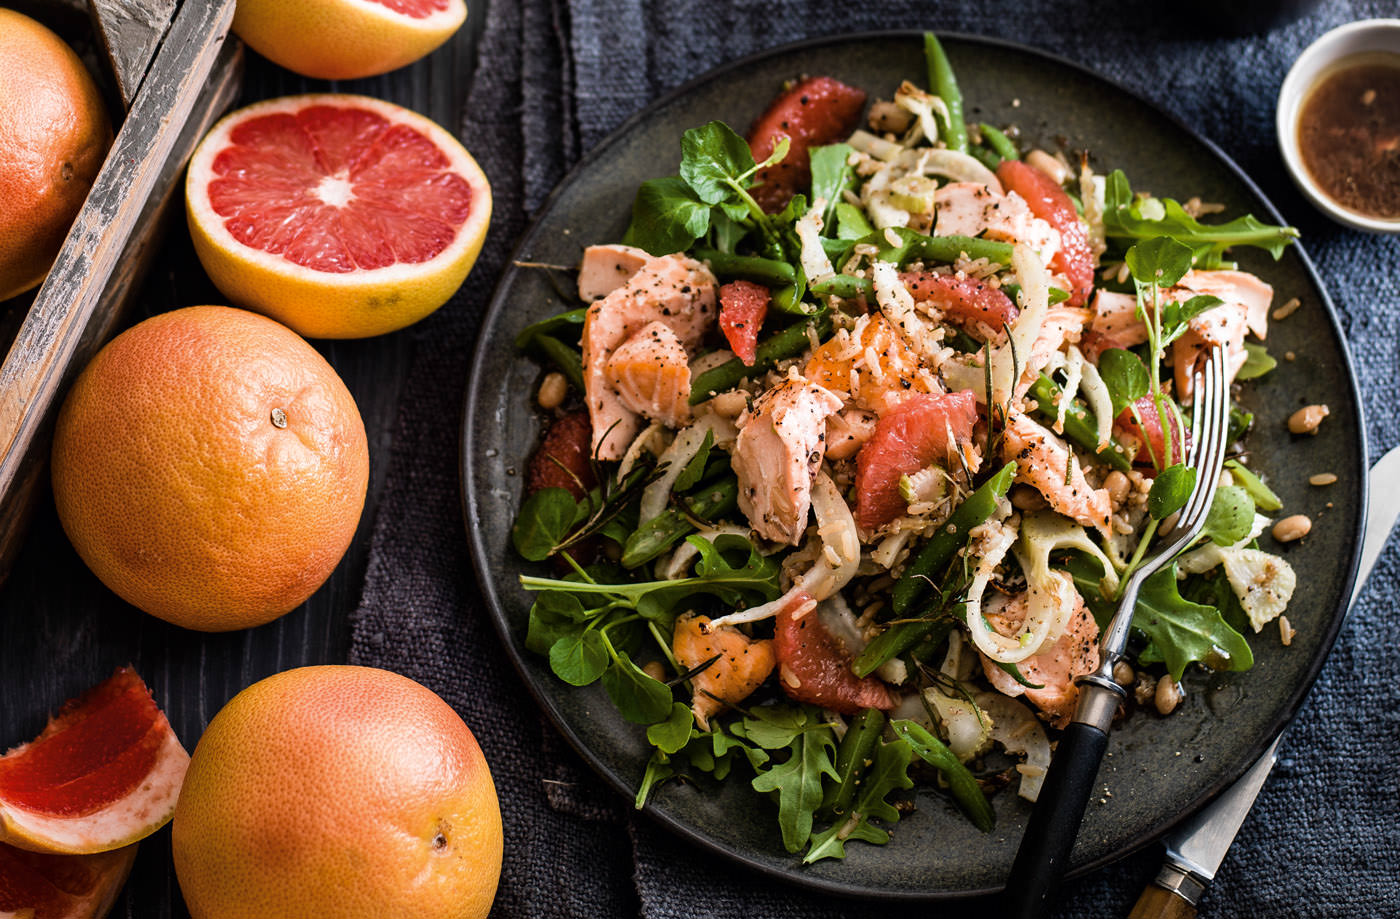 Salad With Grapefruit Wallpapers High Quality | Download Free